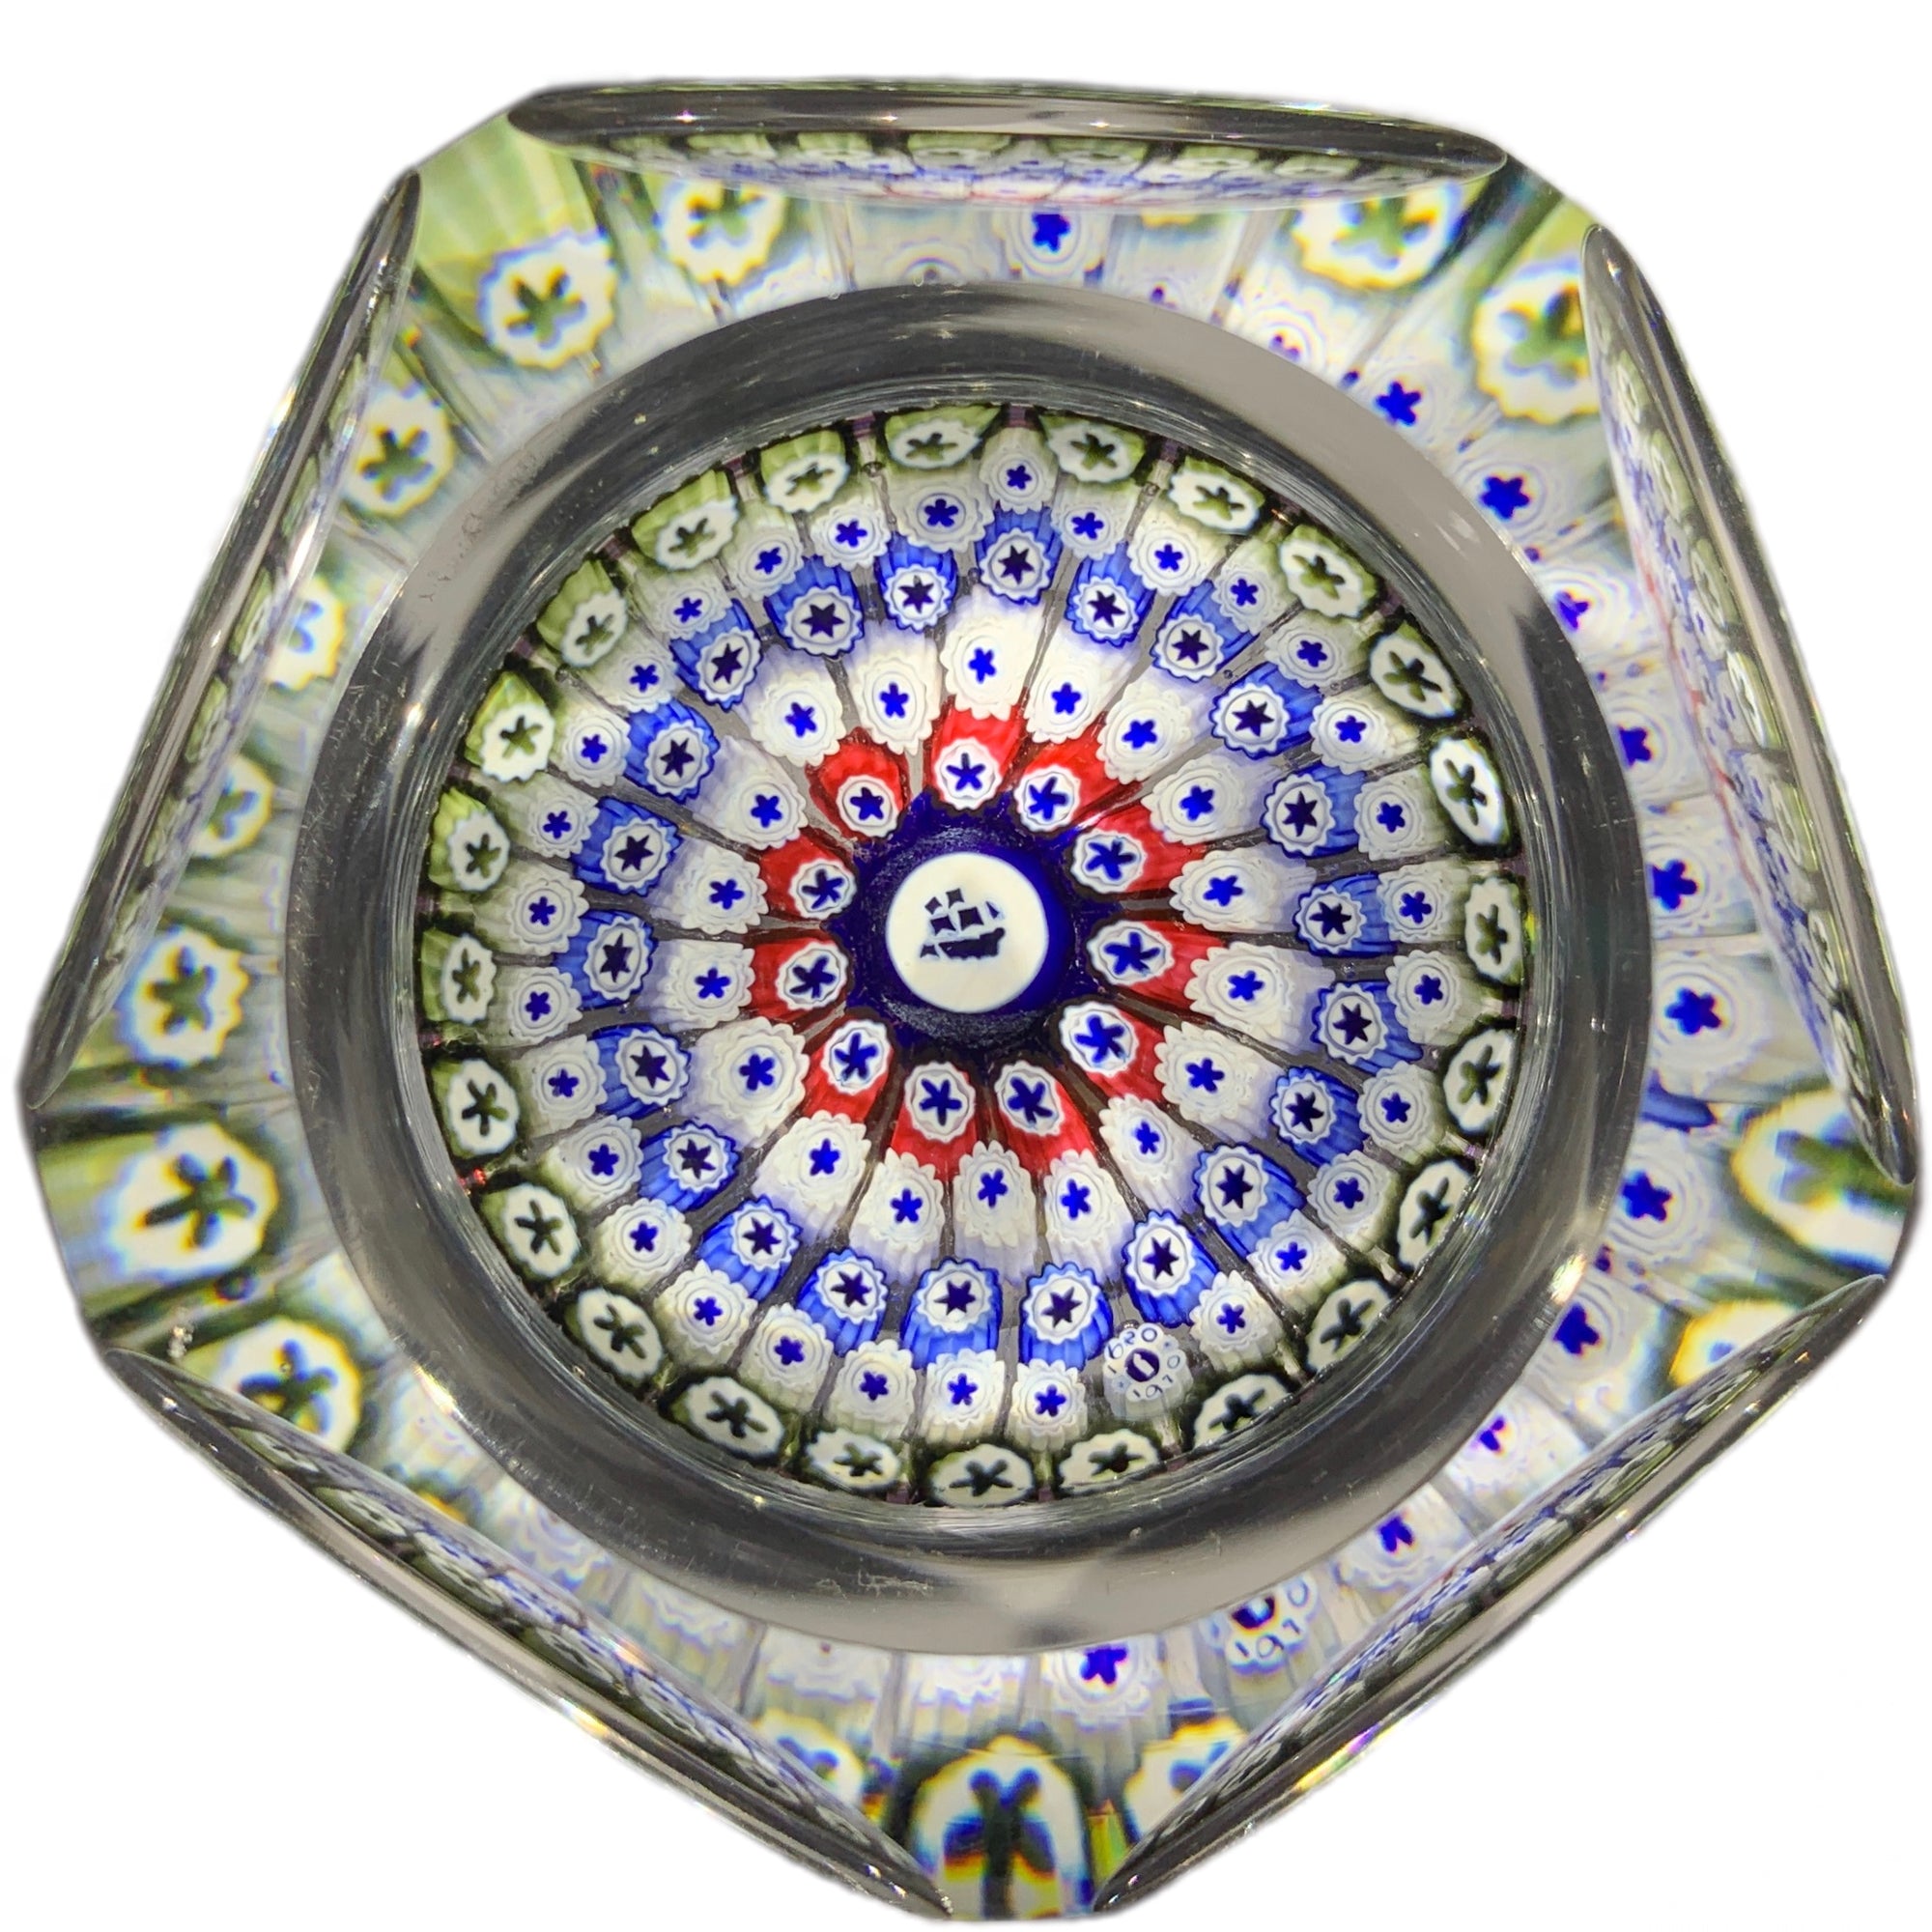 Whitefriars 1970 "Mayflower" W/ Concentric Complex Millefiori Art Glass Paperweight